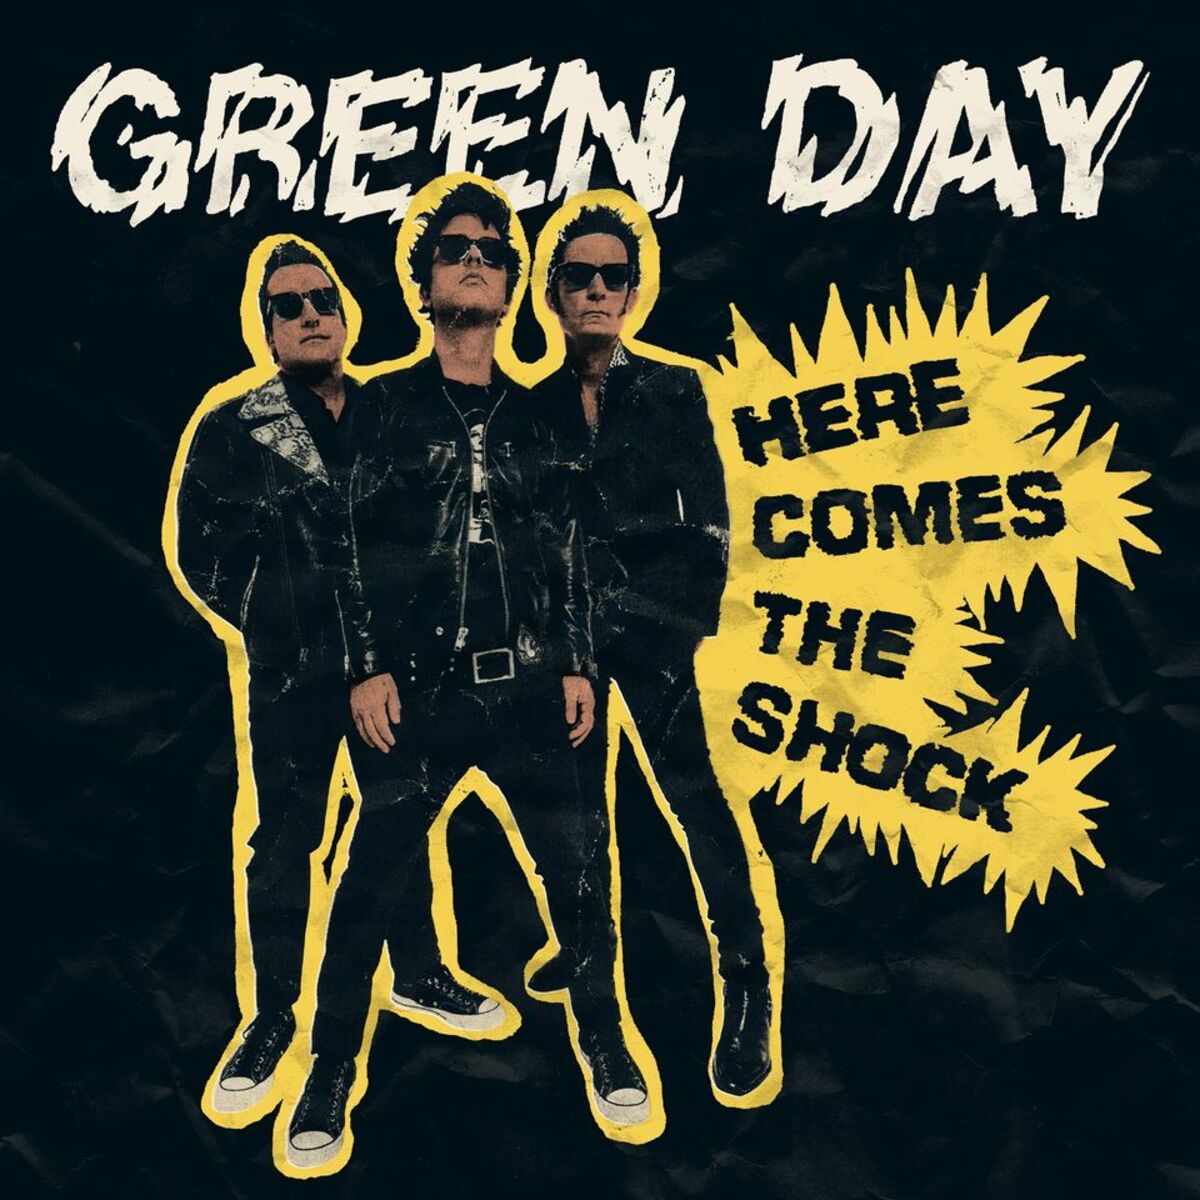 GREEN DAY、新曲「Here Comes The Shock」リリース！